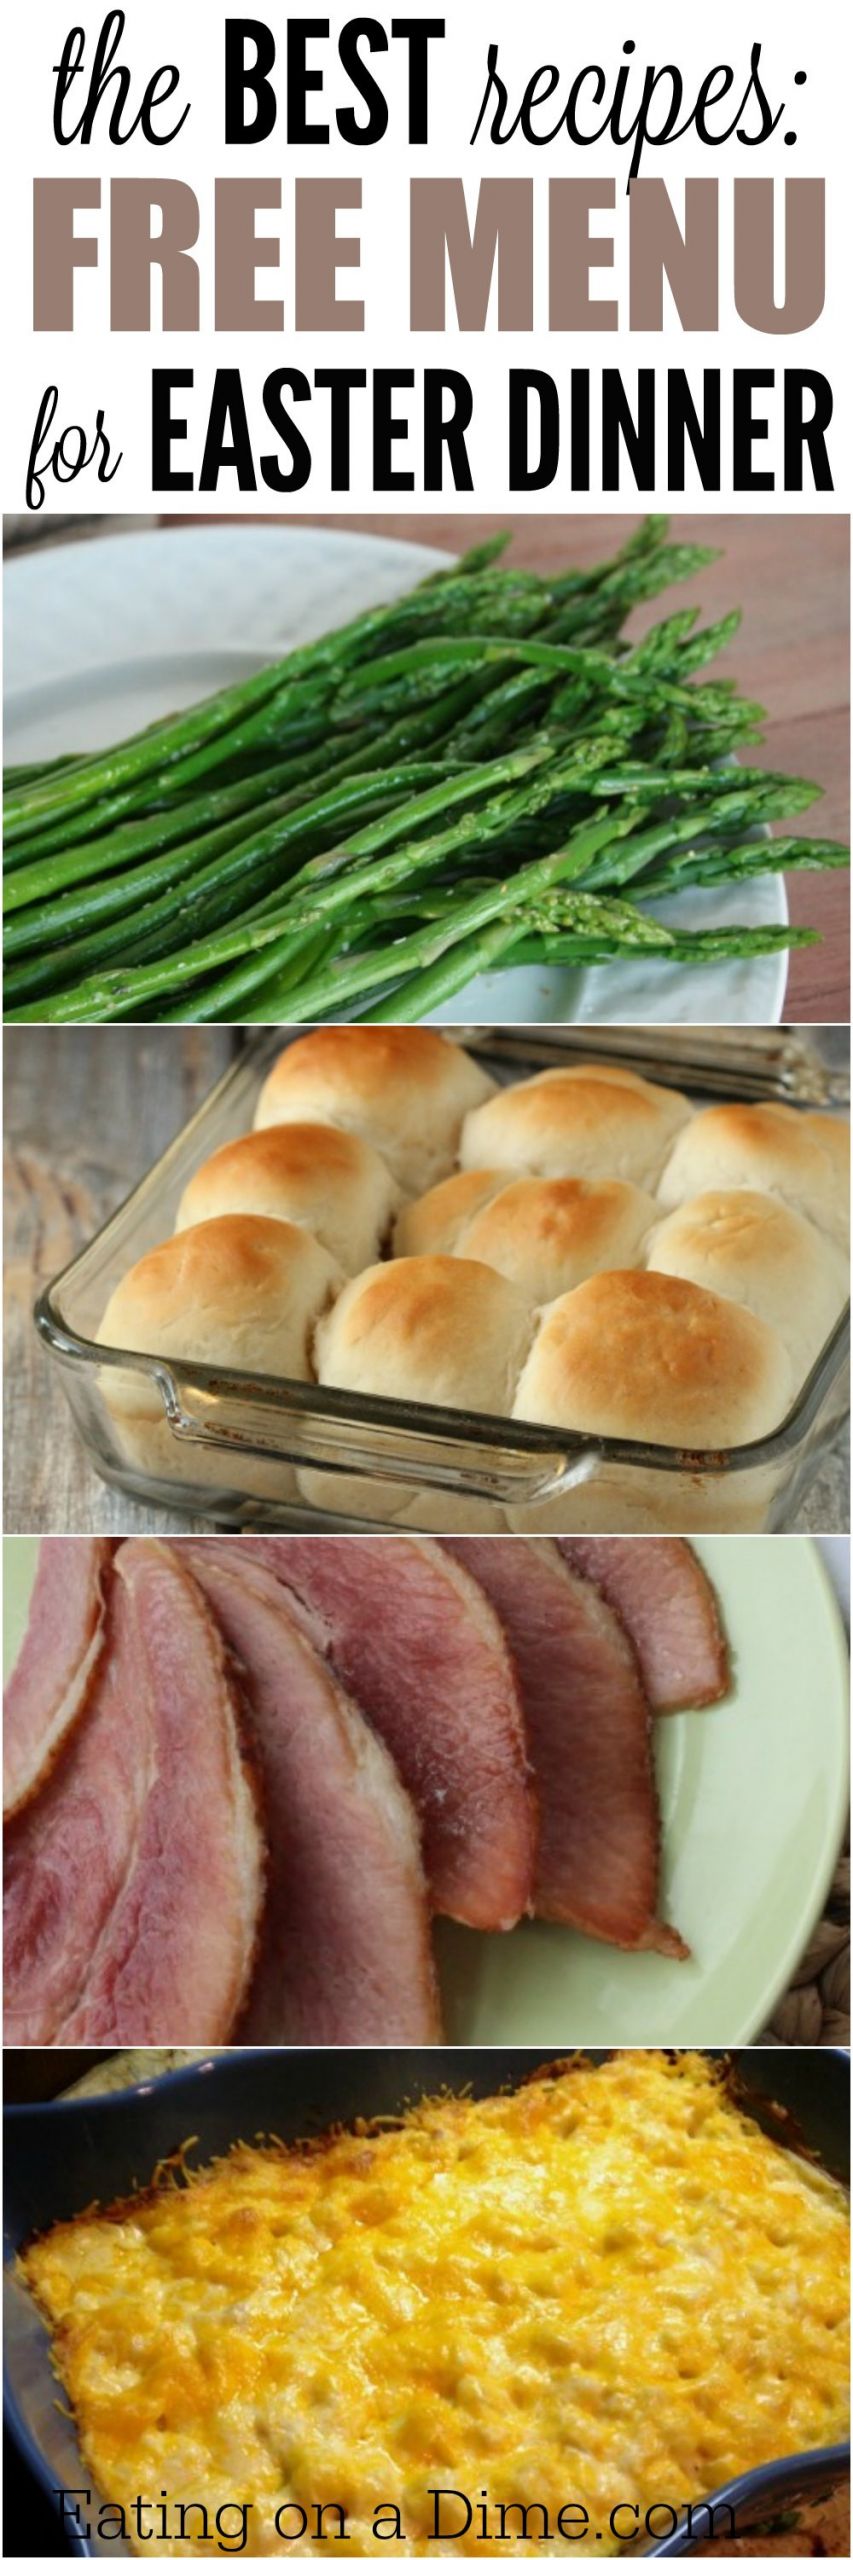 Easter Lunch Menu Ideas
 Easter Menu Ideas and Recipes The Best Easter Dinner recipes